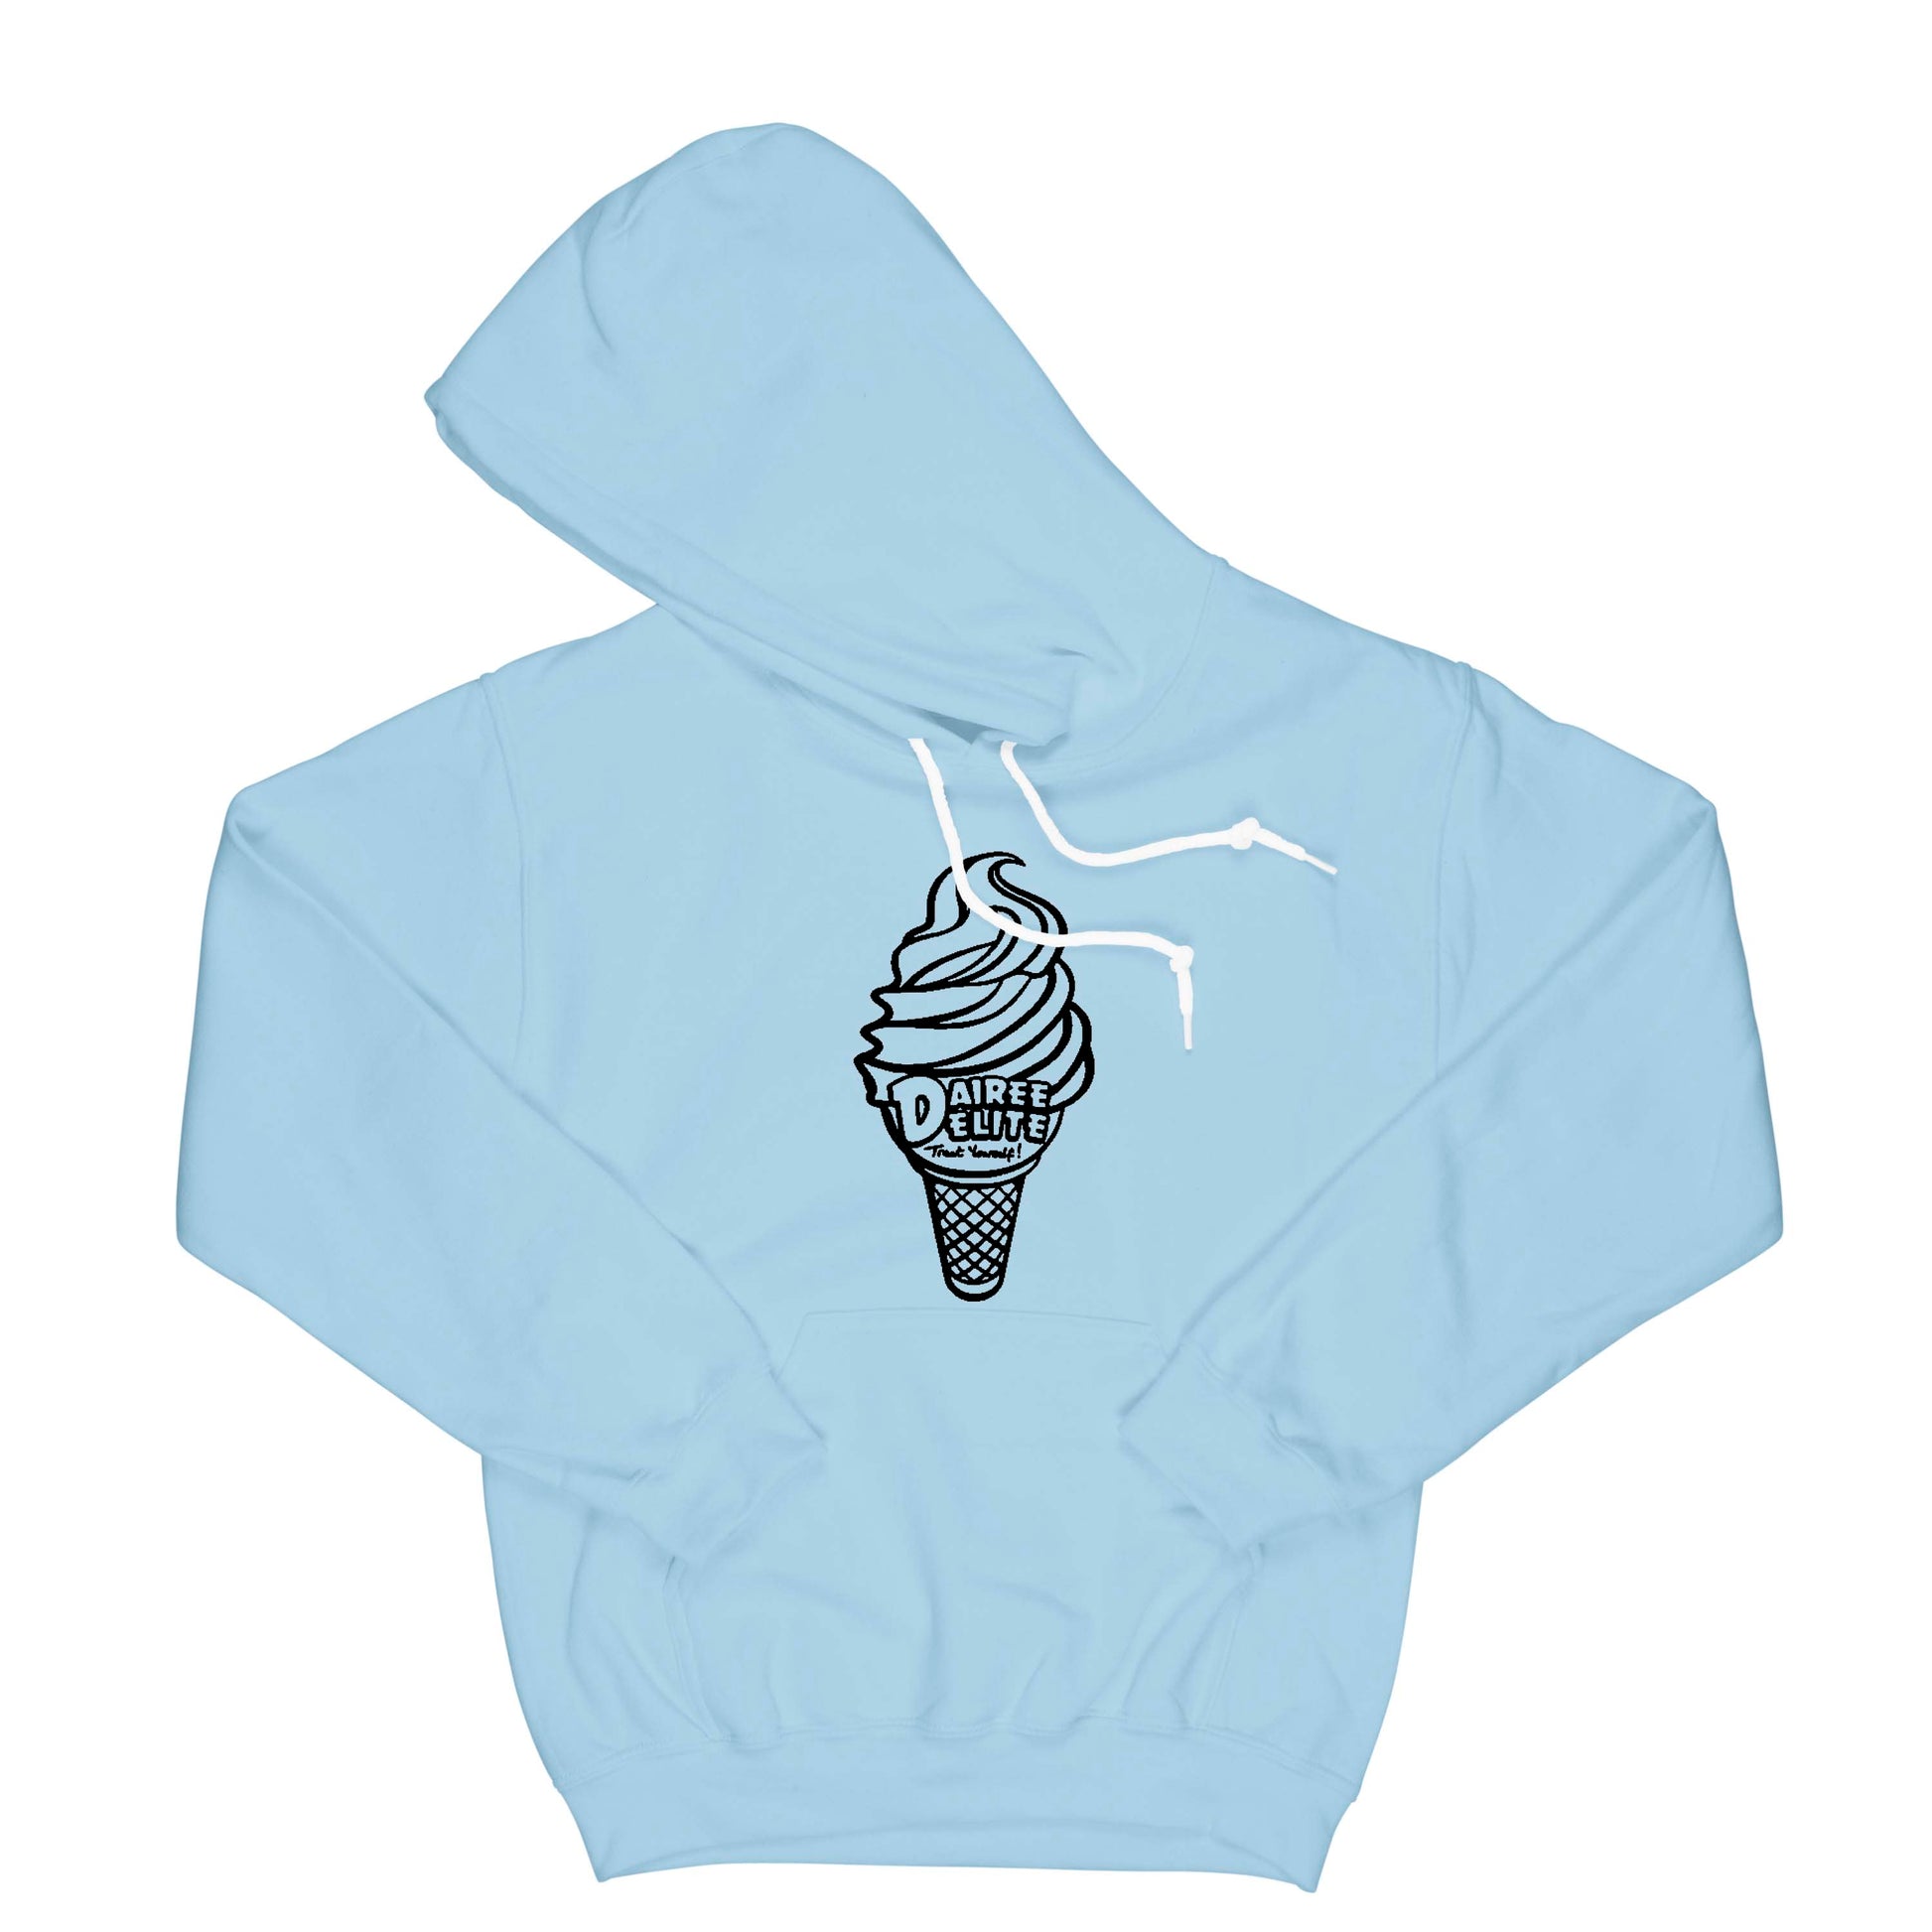 Dairee Delite 70th Anniversary Treat Yourself Cone Hoodie Small Light Blue